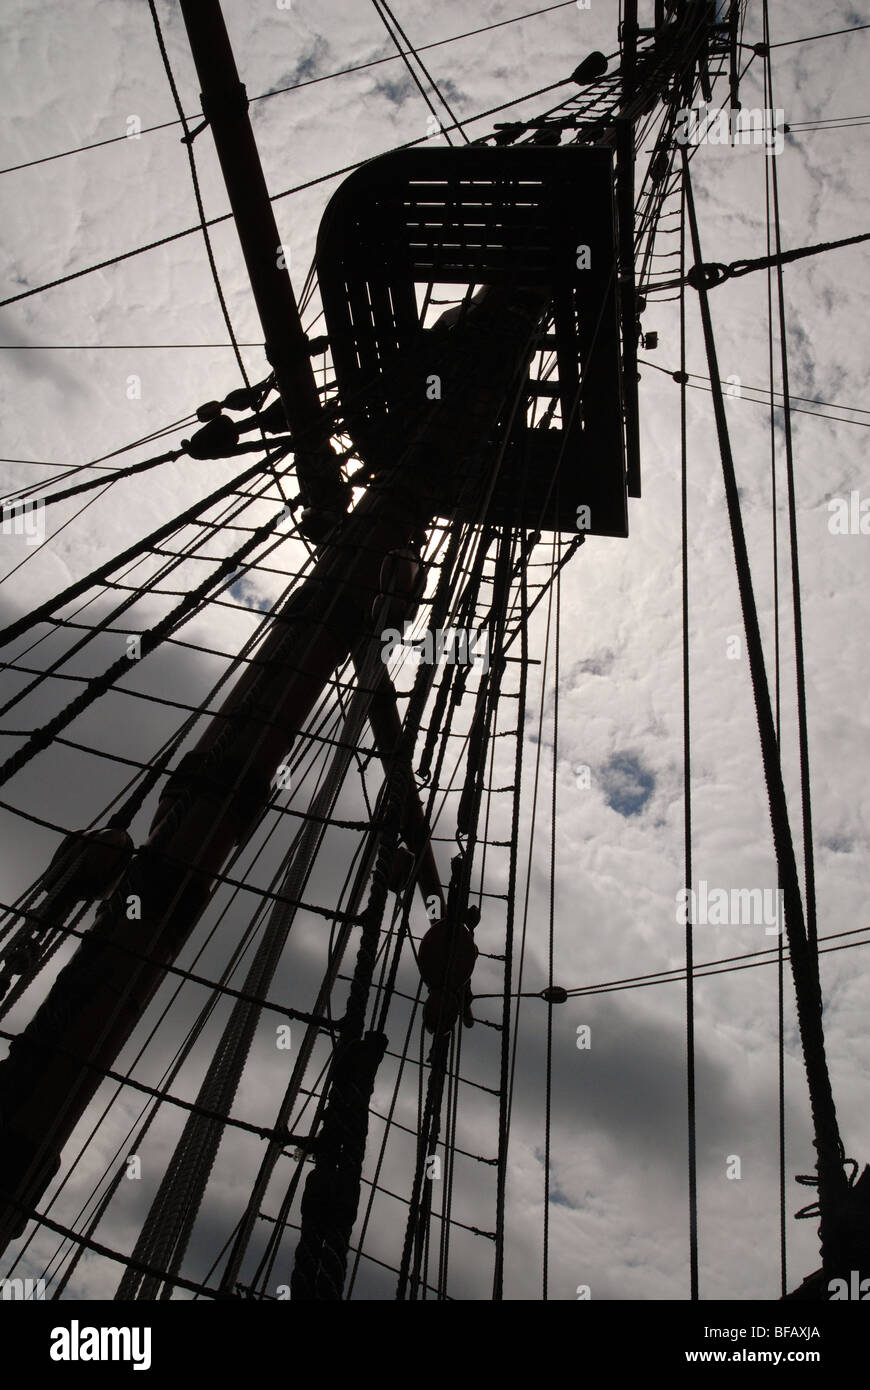 Rigging on The Hector, moored at Pictou, Nova Scotia Stock Photo